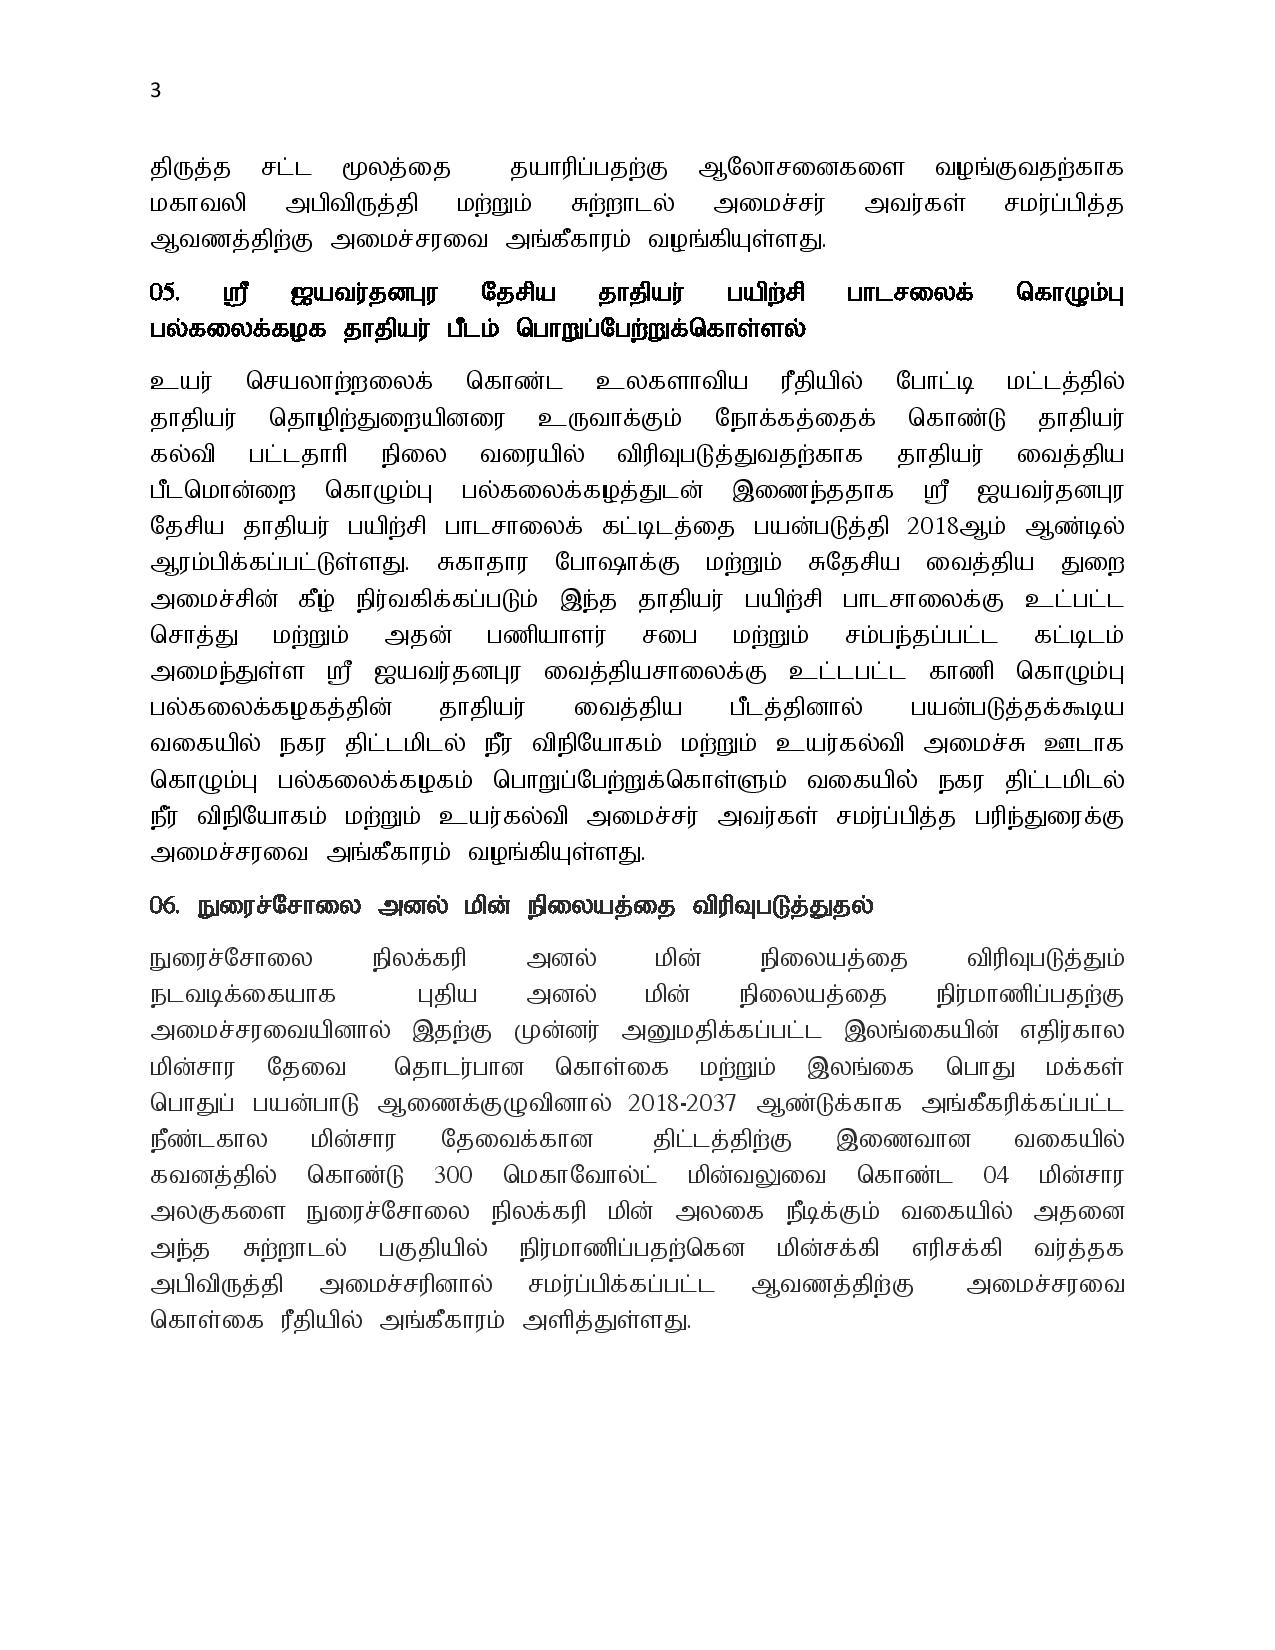 24.09.2019 cabinet page 003